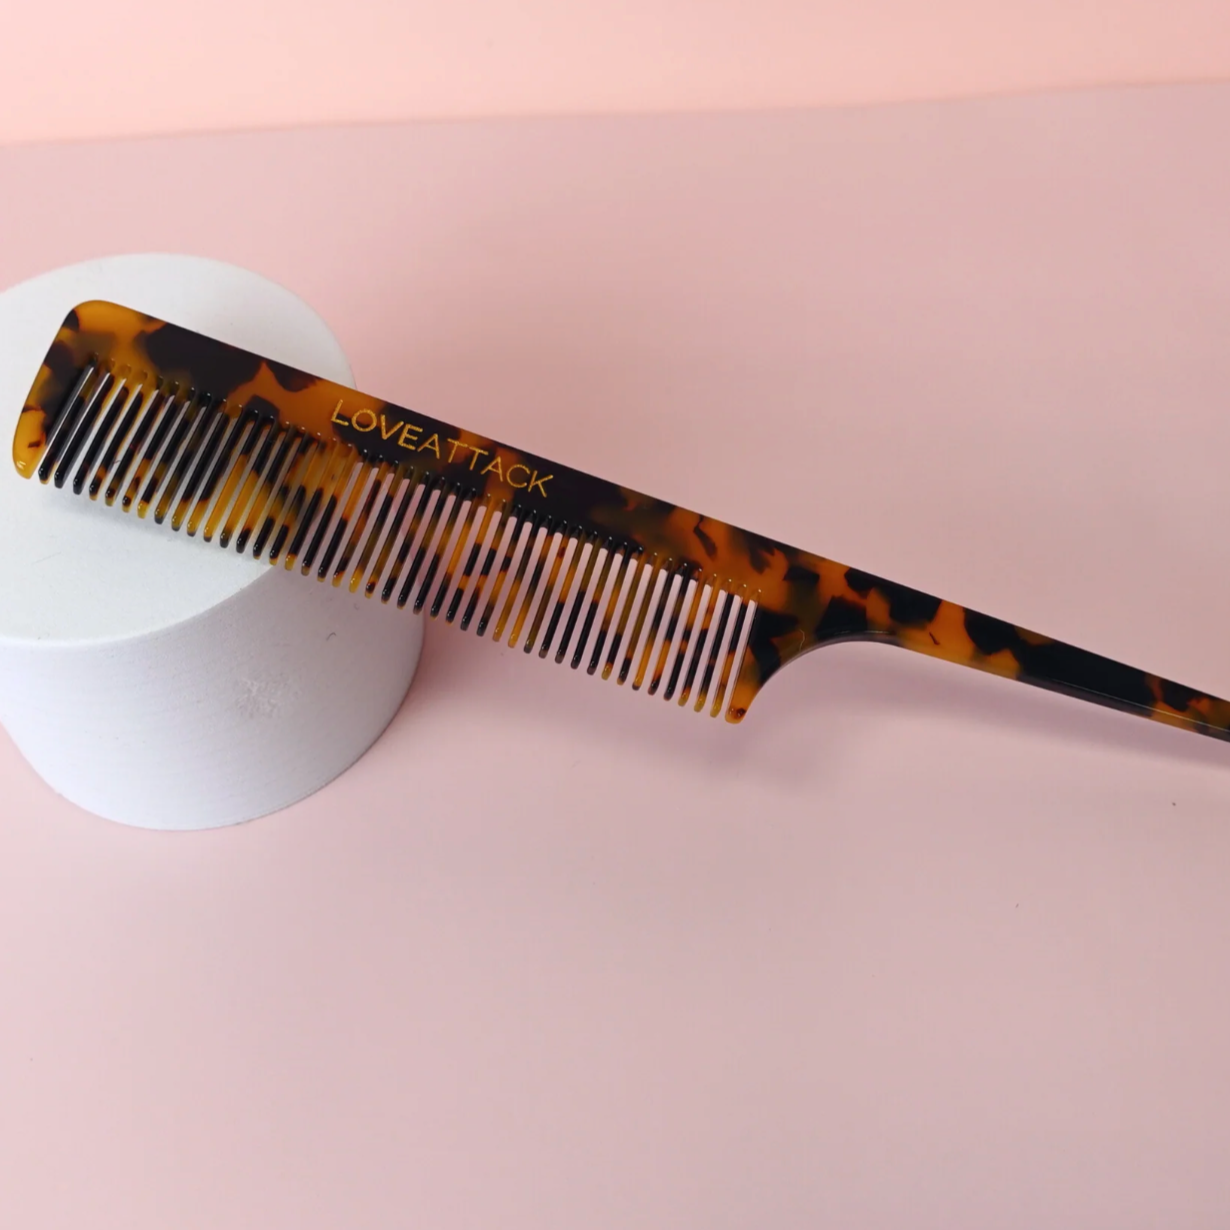 Love Attack - Cellulose Acetate Tail Hair Comb